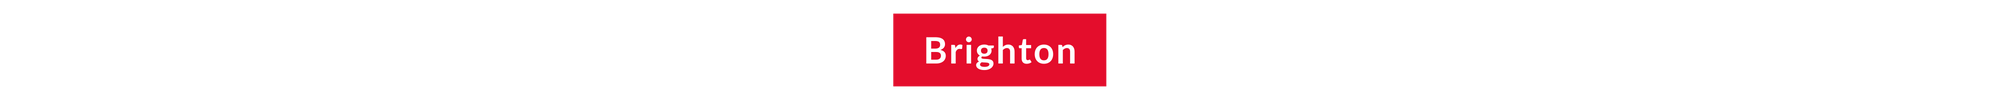 The word Brighton in a red block